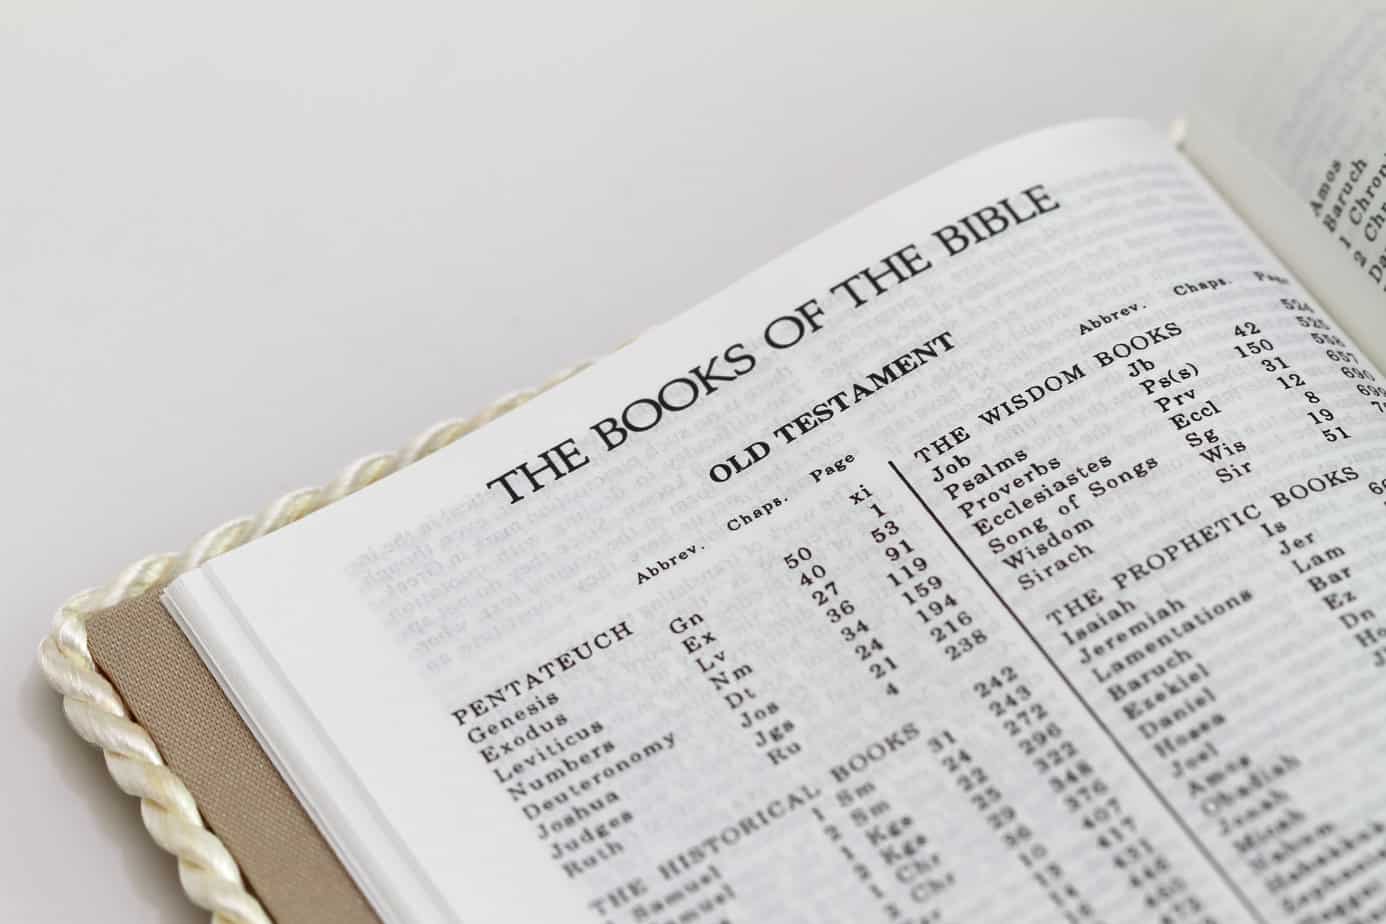 books of the Bible in order